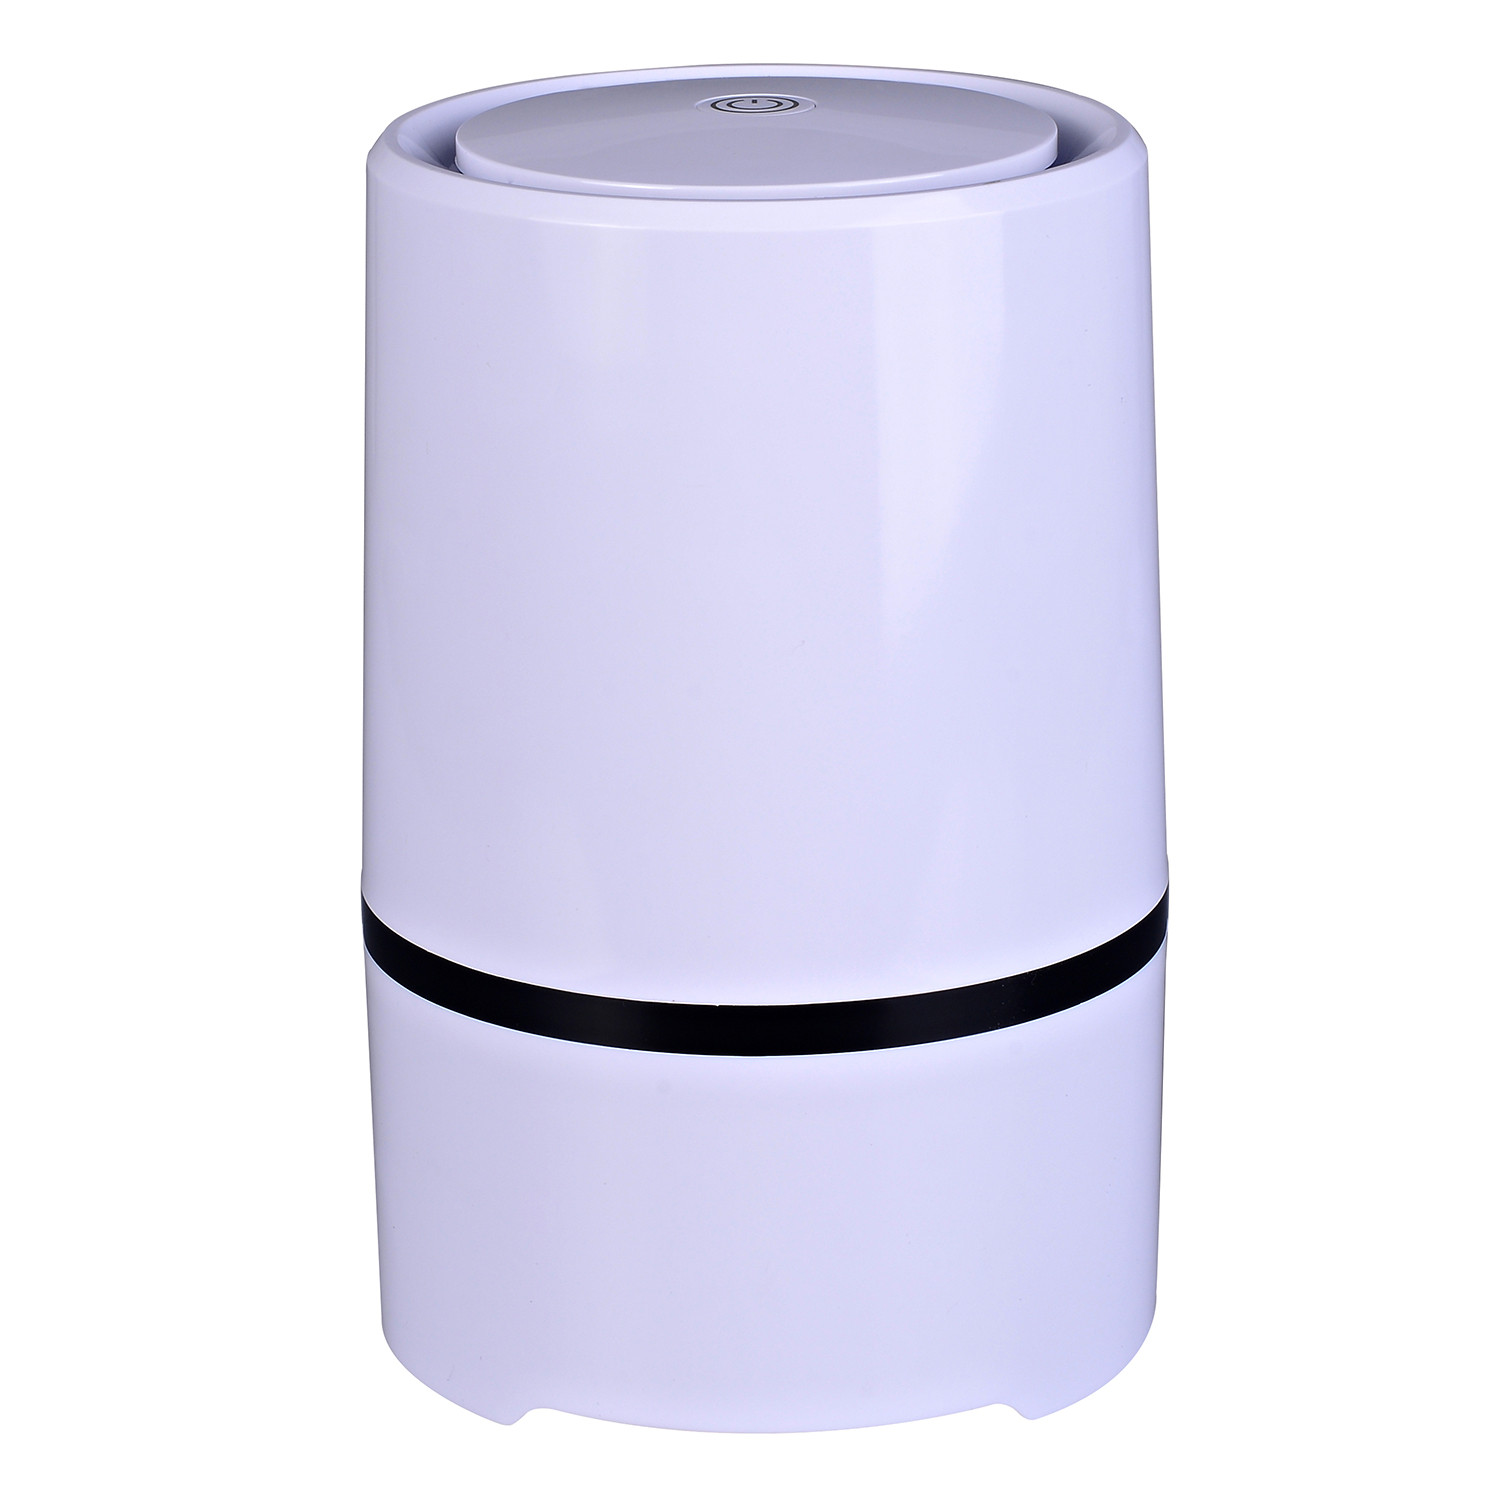 GL-203 White HEPA Filter Air Purifier Image 5